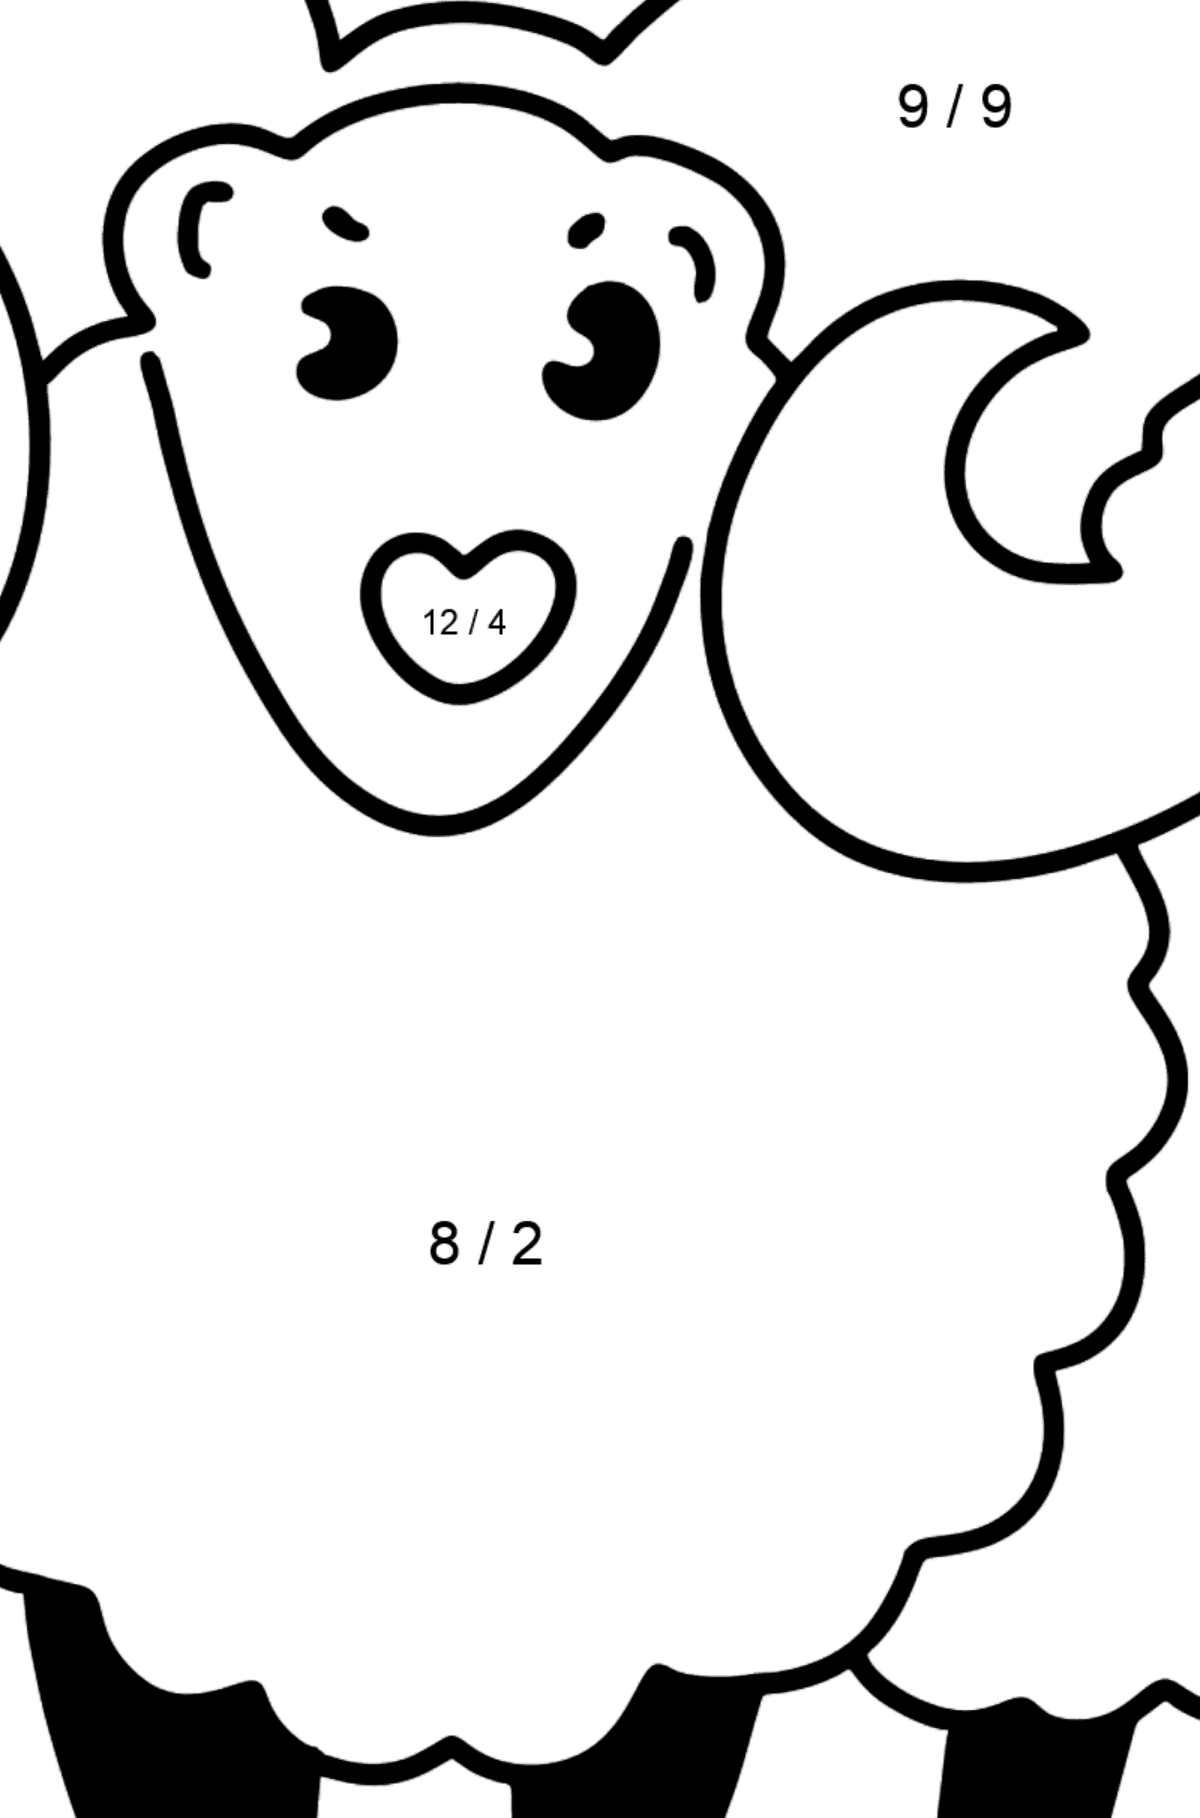 Home Lamb coloring page - Math Coloring - Division for Kids